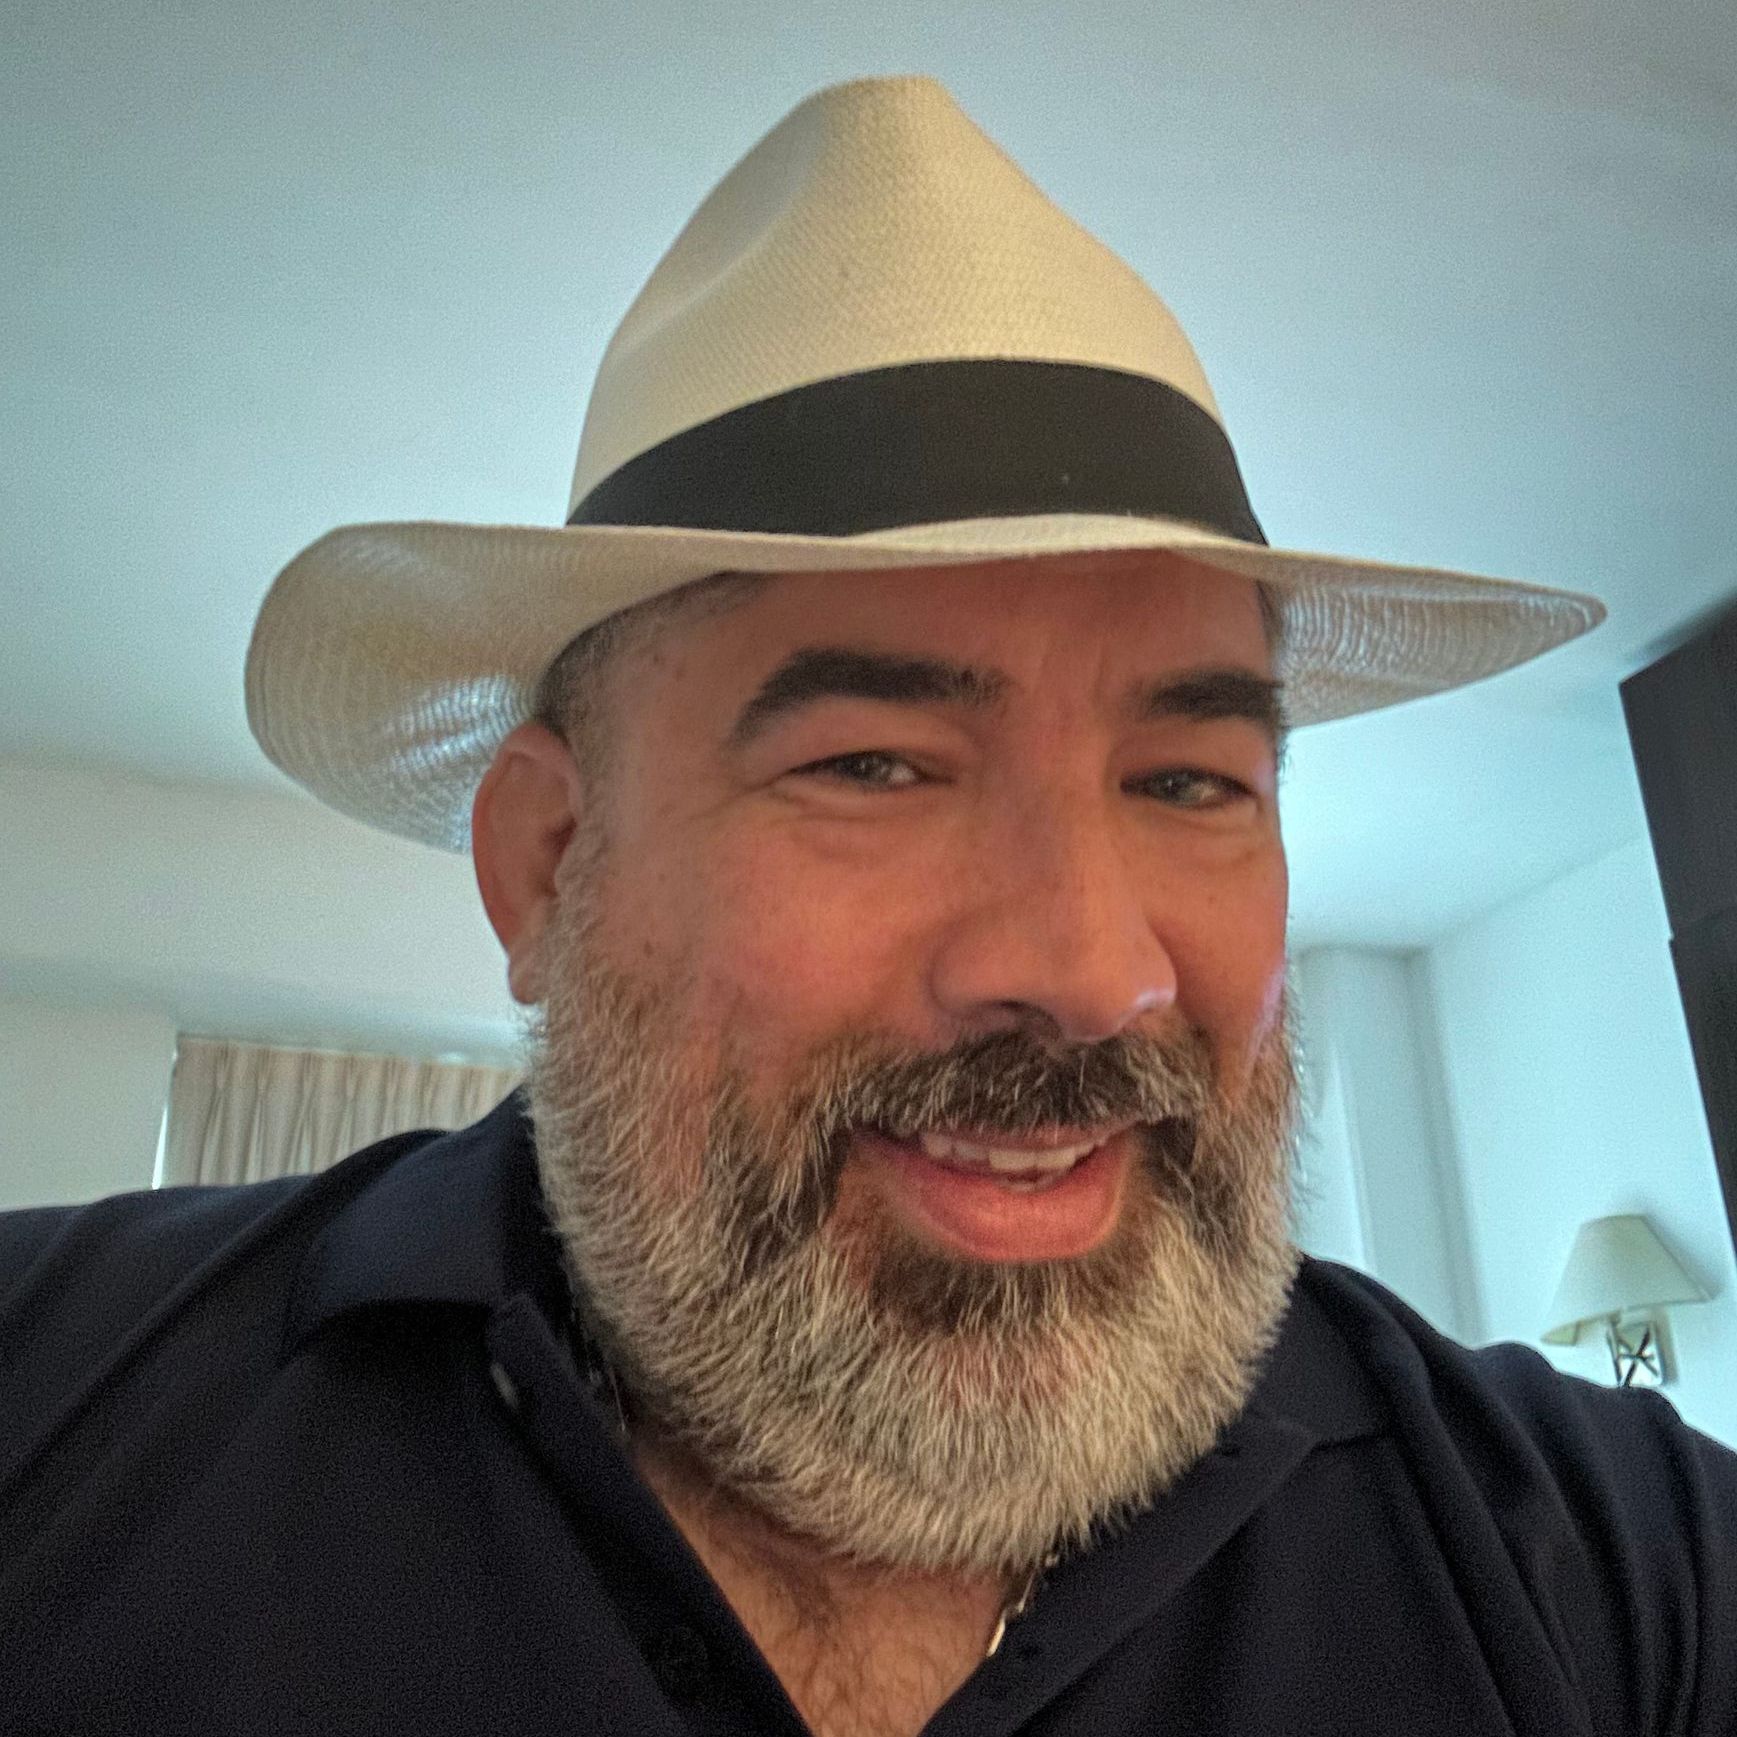 A man with a beard wearing a hat and smiling